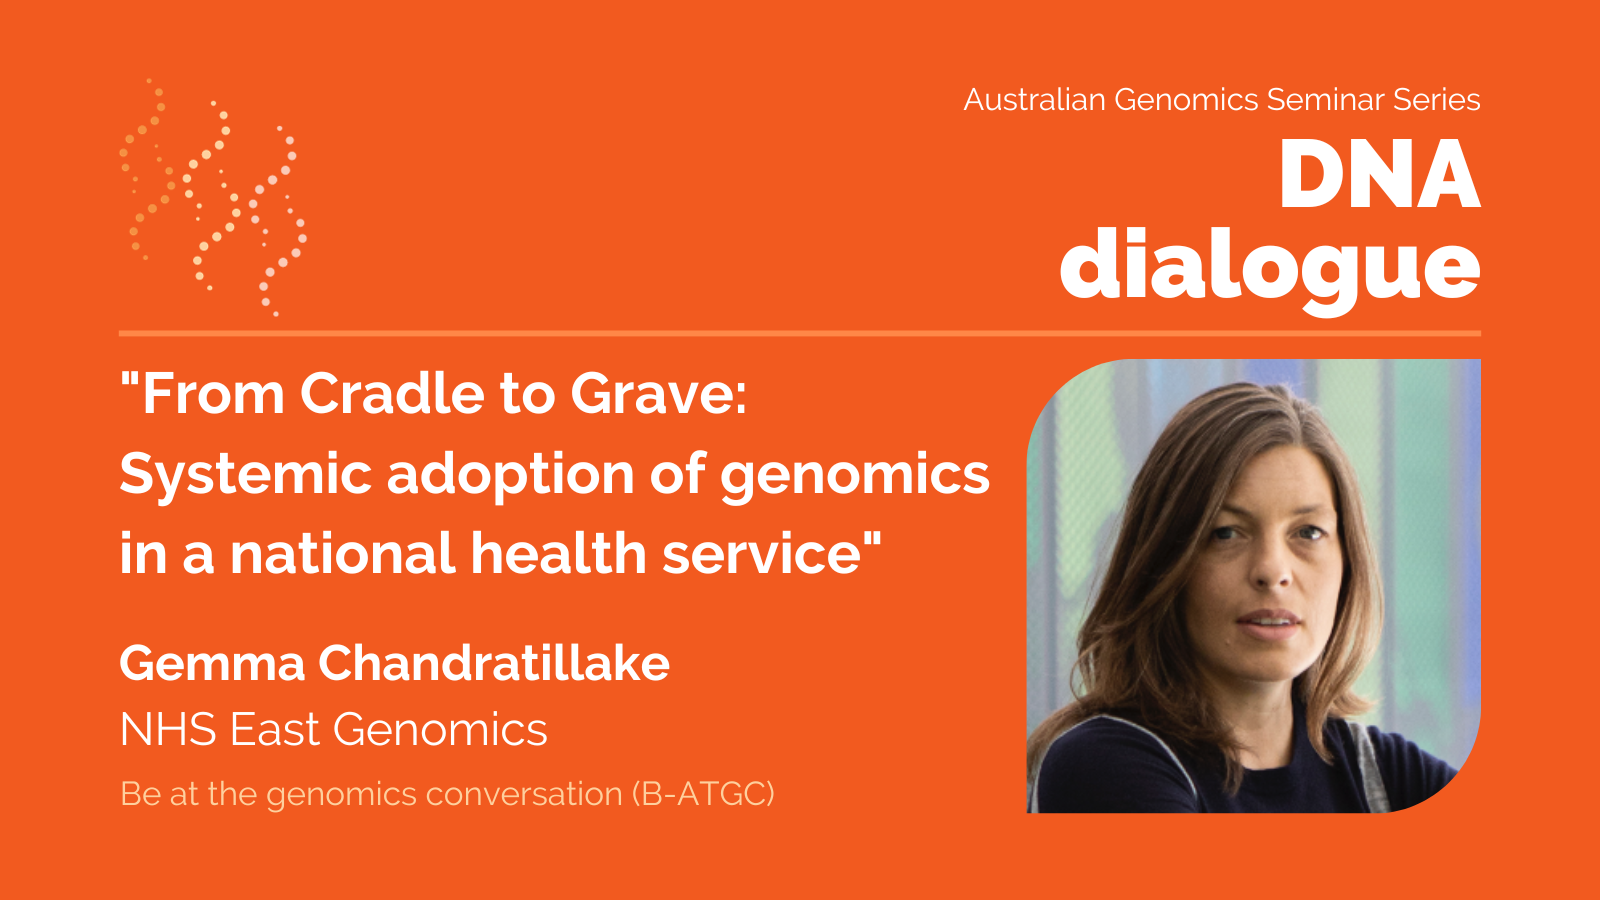 DNA dialogue seminar on 26 October 2023: "From cradle to grave: systemic adoption of genomics in a national health service”, featuring Dr Gemma Chandratillake from NHS East Genomics in the UK.